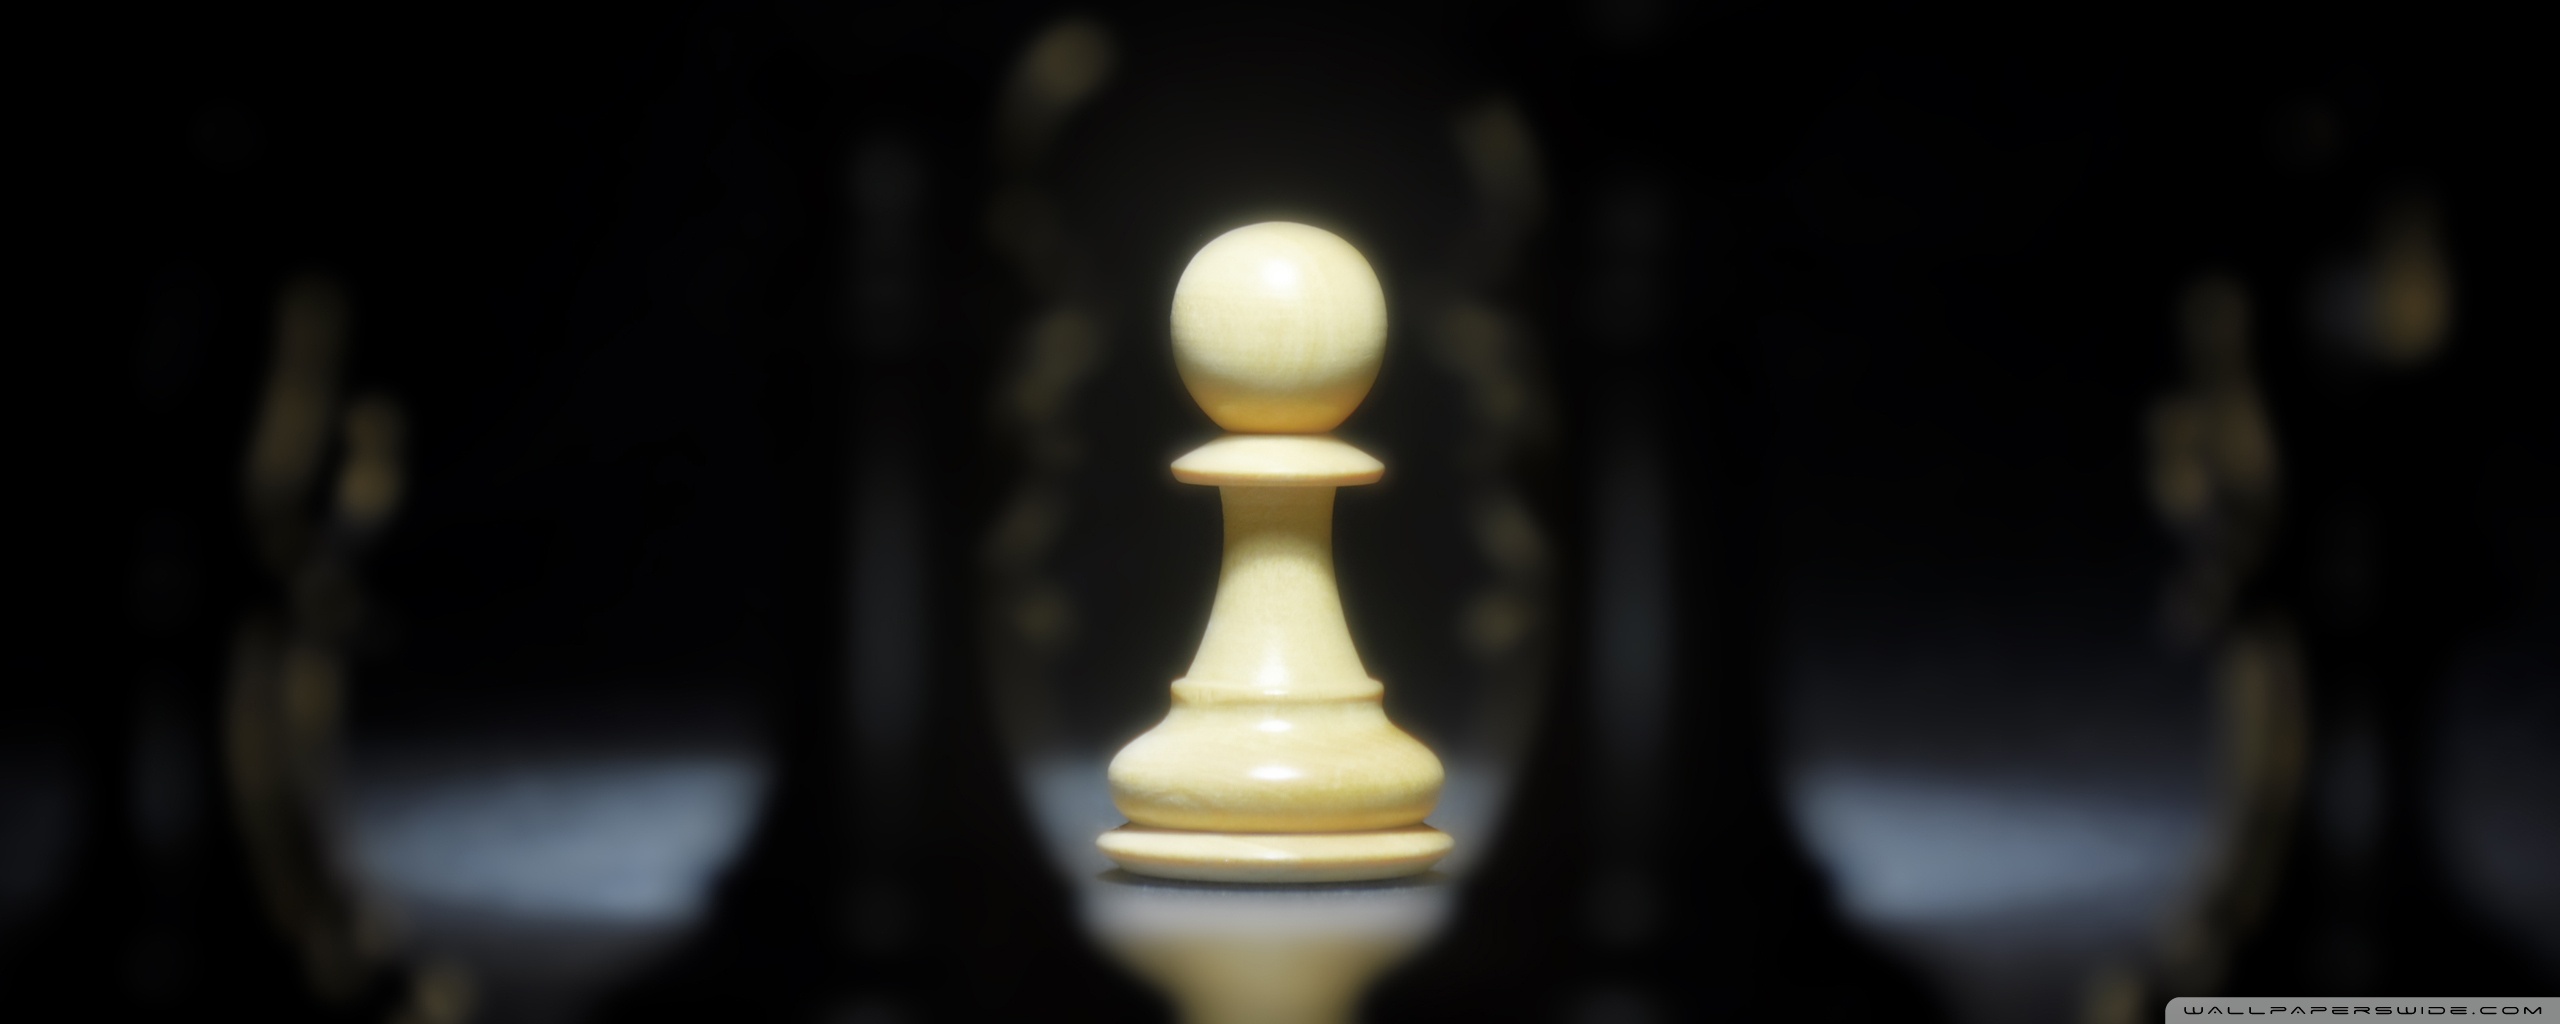 Chess Piece Wallpapers, HD Chess Piece Backgrounds, Free Images Download